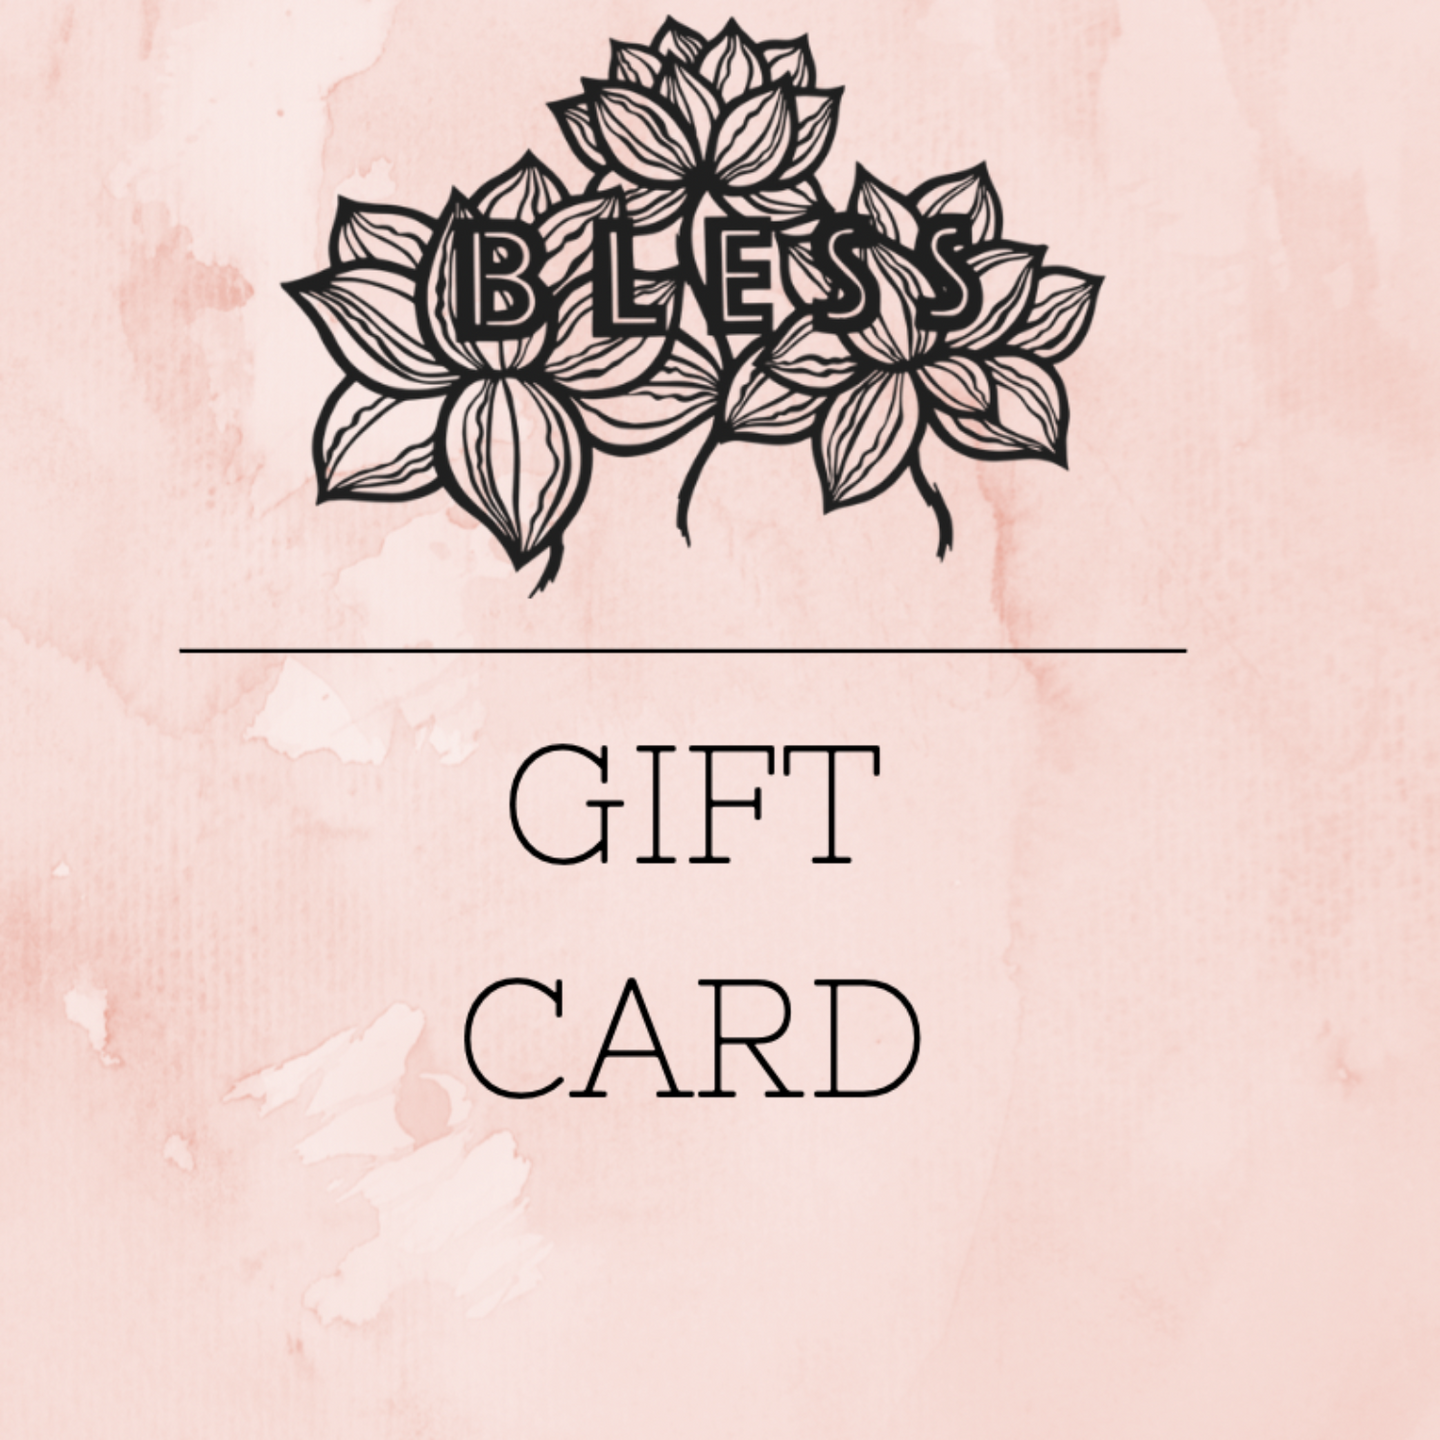 Bless Gift Card